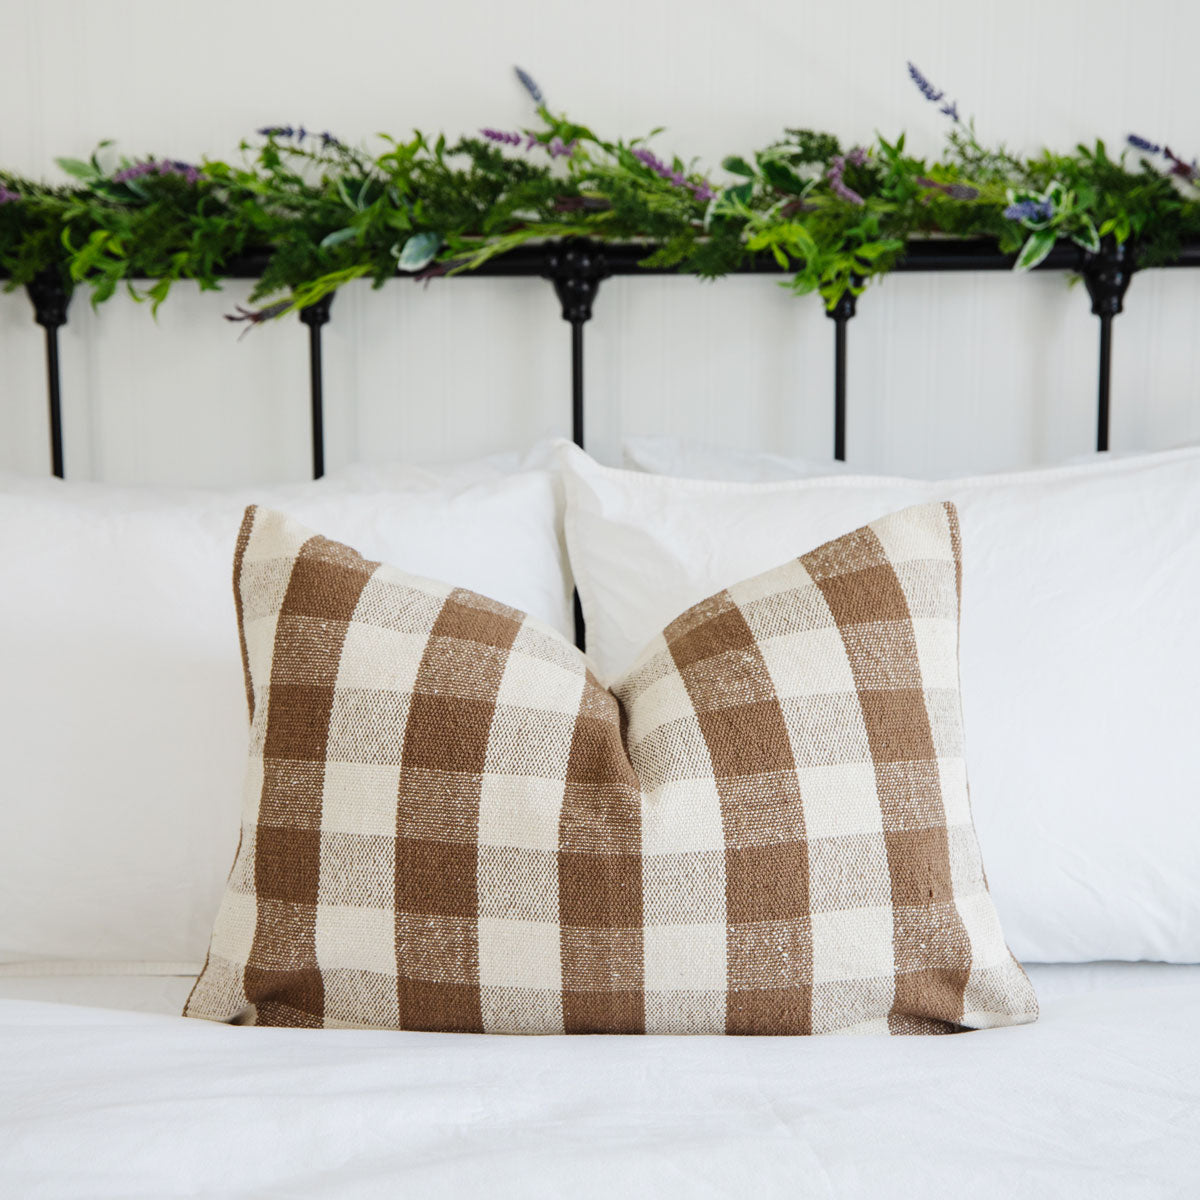 Signature Woven Brown Gingham Pillow Cover